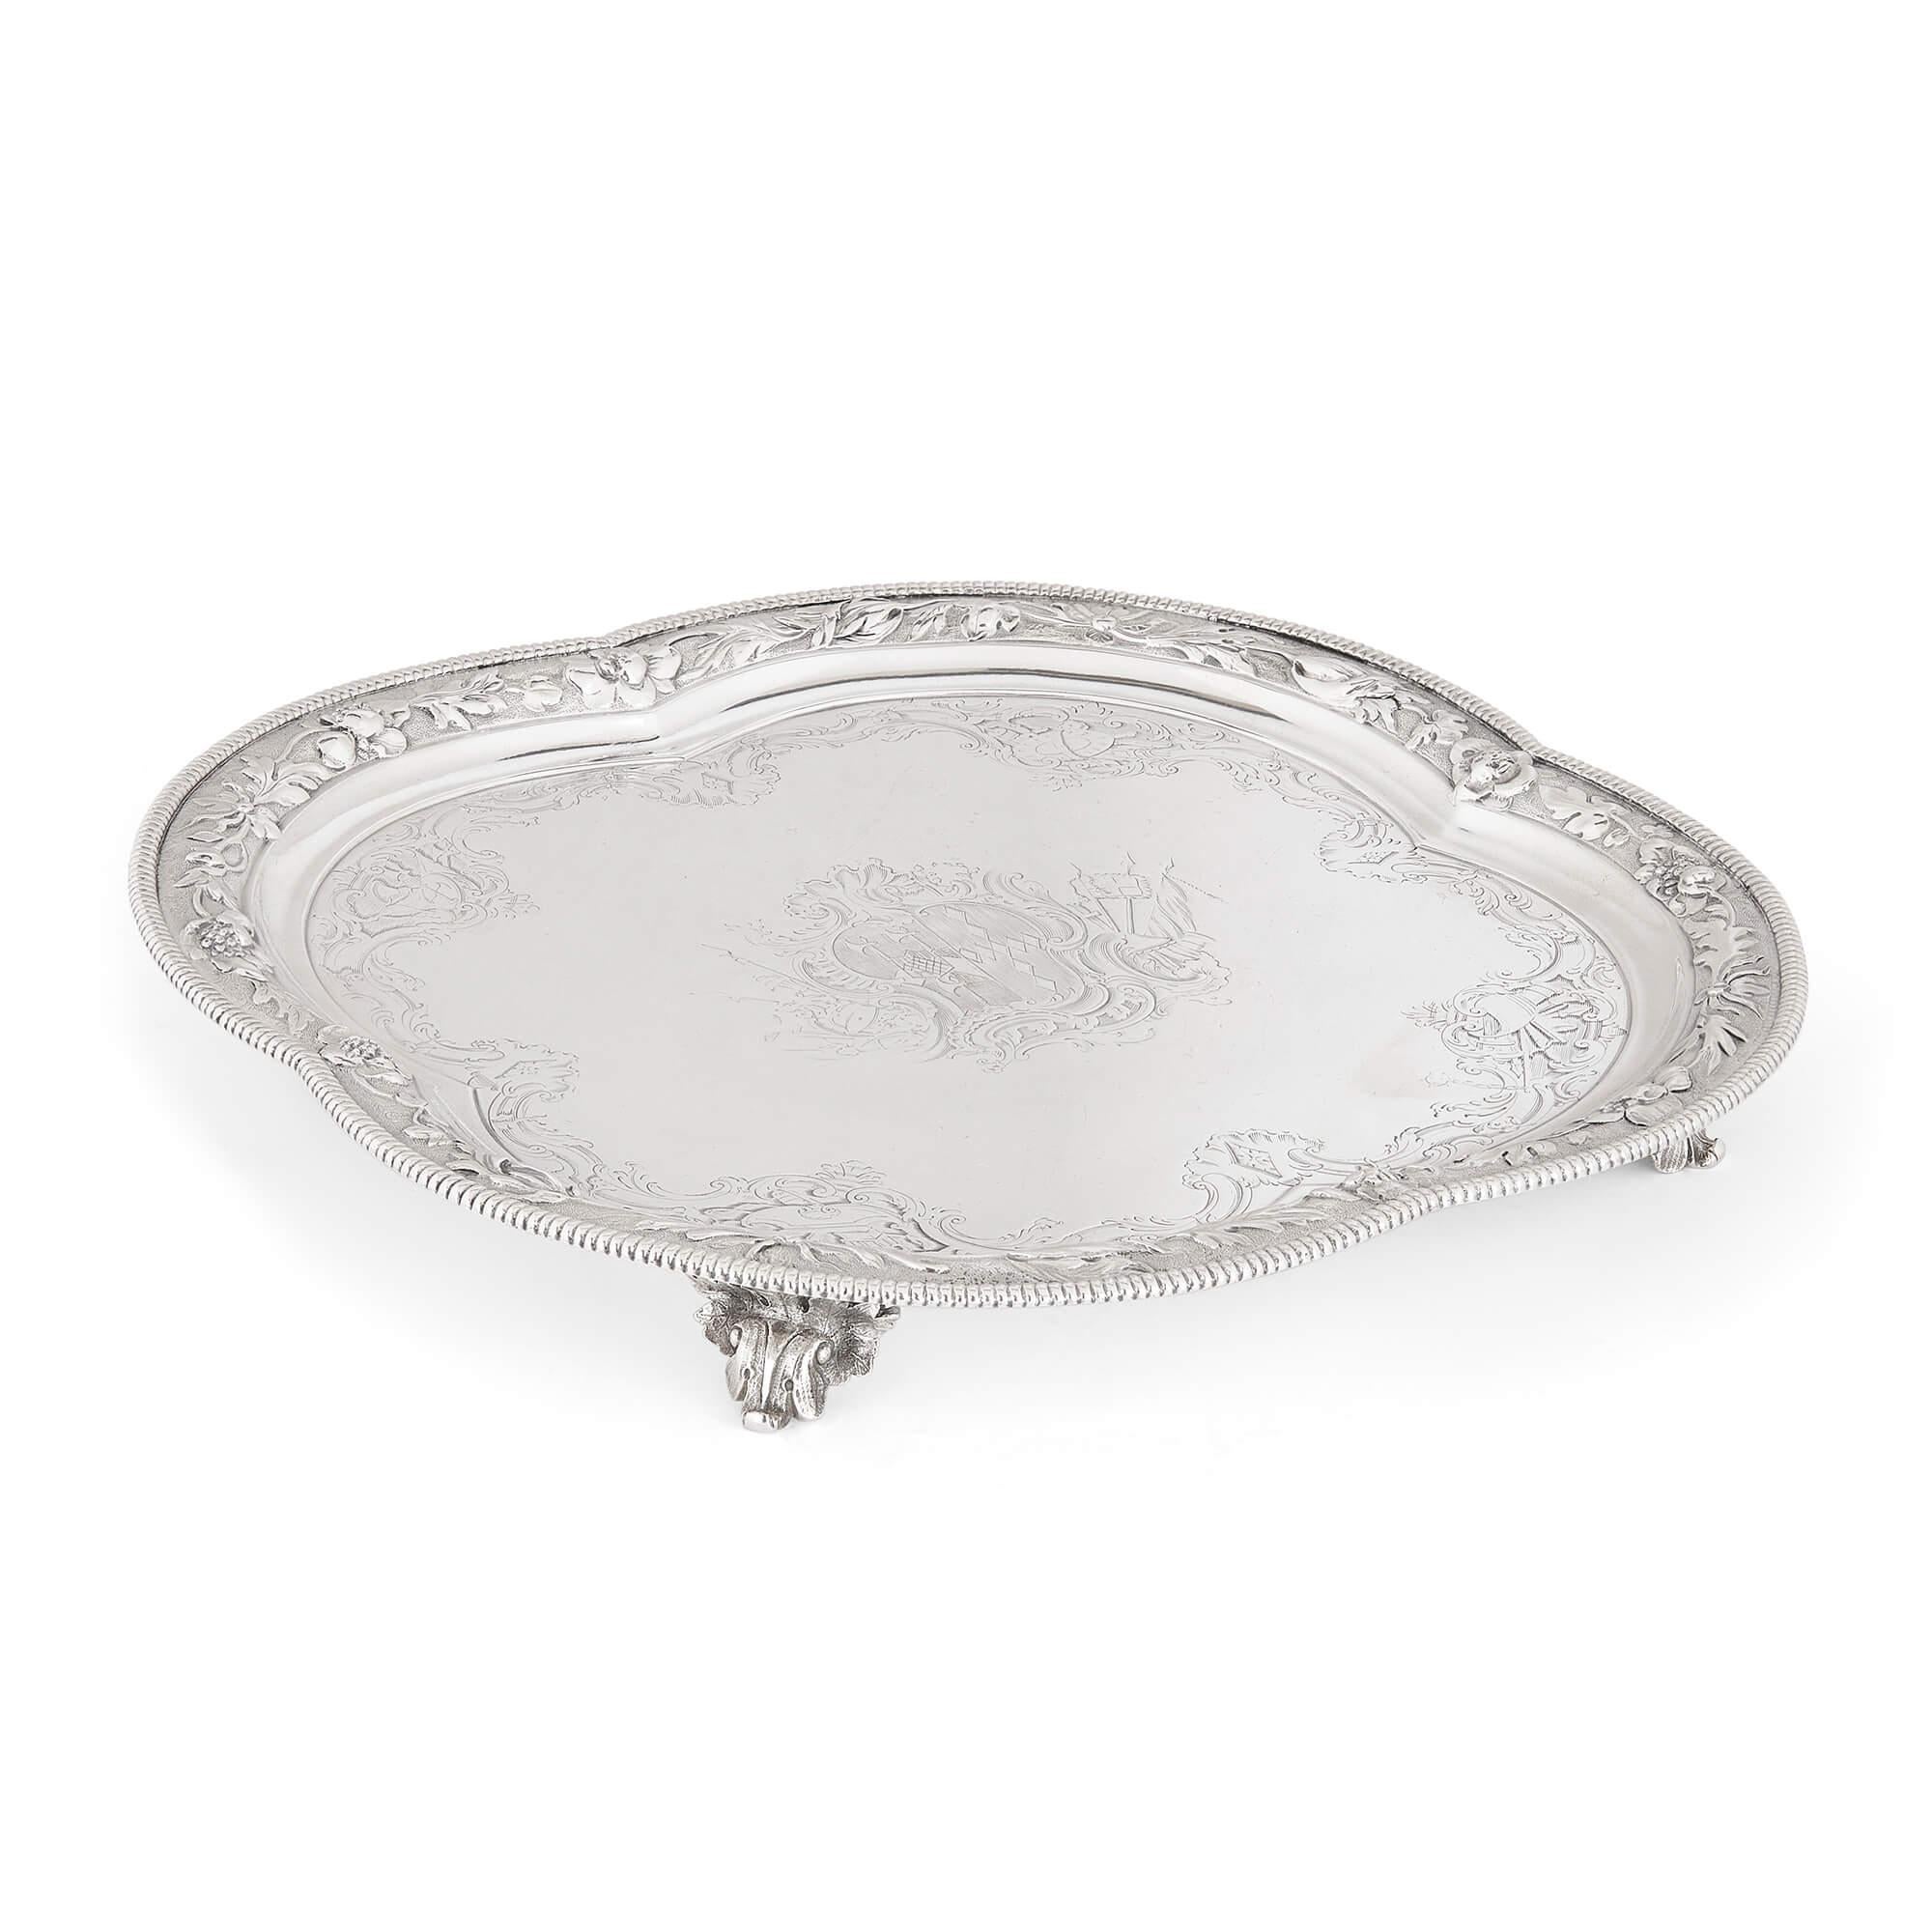 18th century silver salver by Paul de Lamerie 
English, 1744
Height 3cm, diameter 27cm

Hailing from the workshop of the eminent Dutch-born English silversmith, Paul de Lamerie (1688-1751), this silver salver exhibits exquisite craftsmanship and